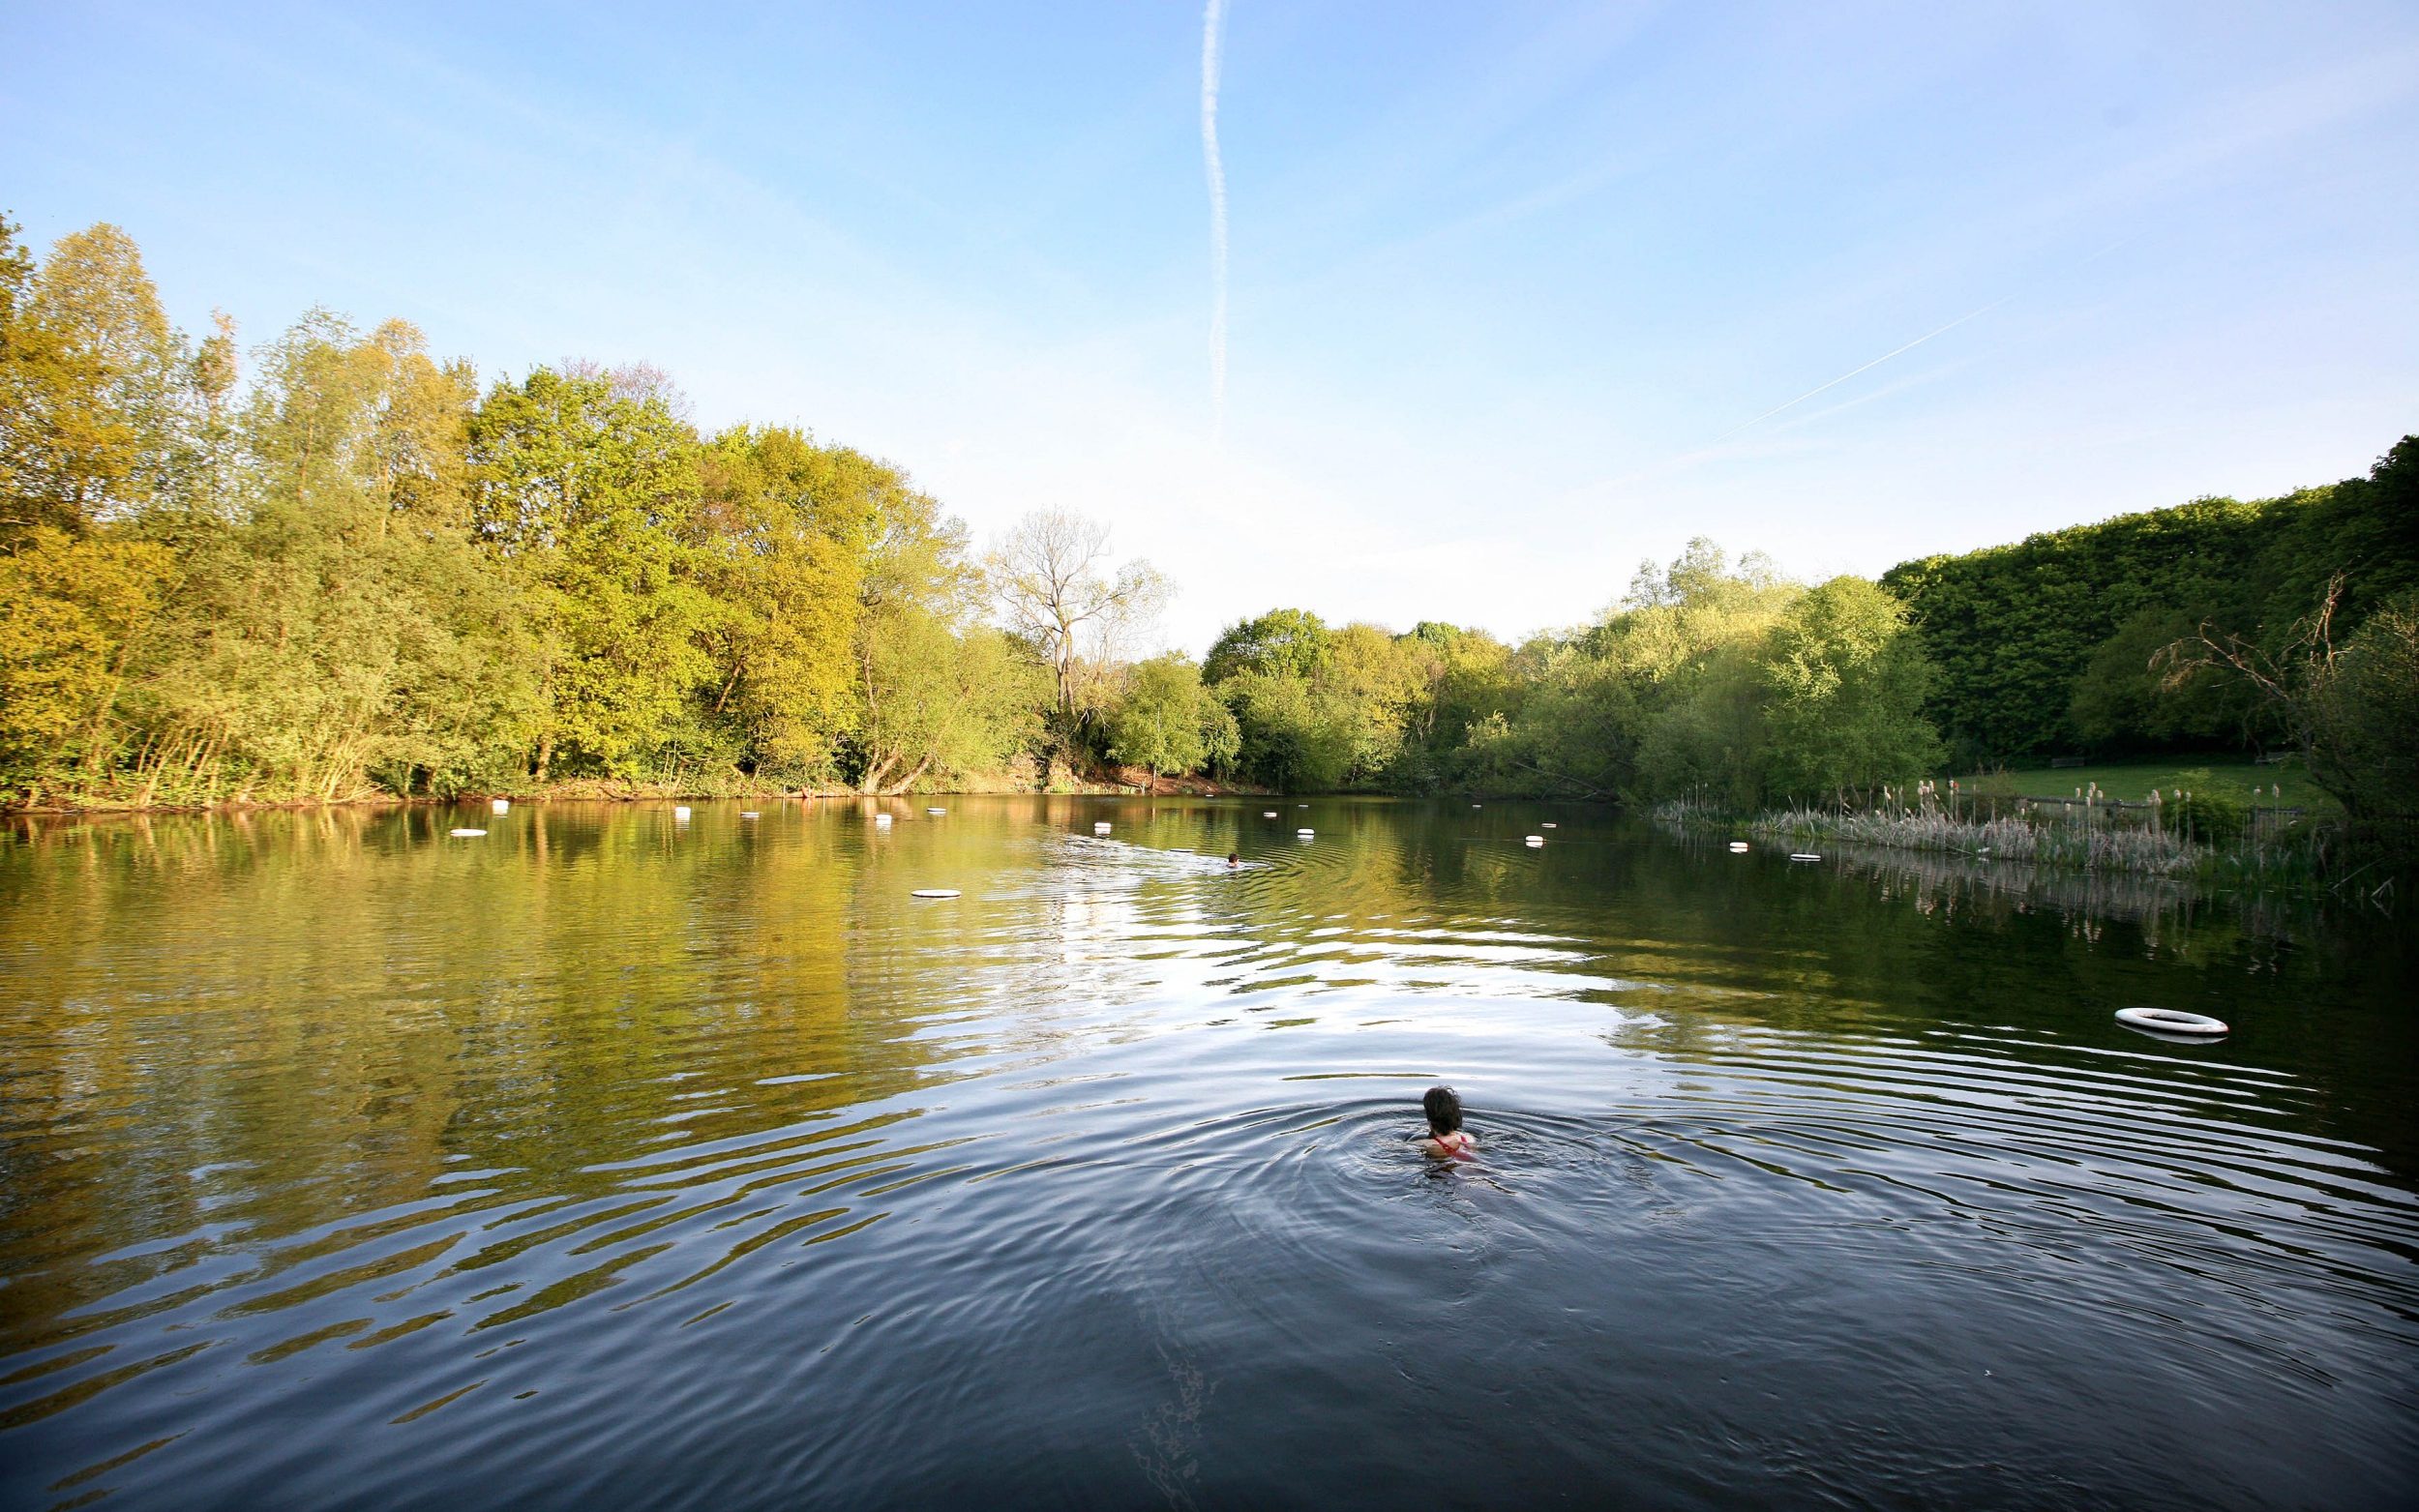 hampstead ladies’ pond trans row ends in shouting match